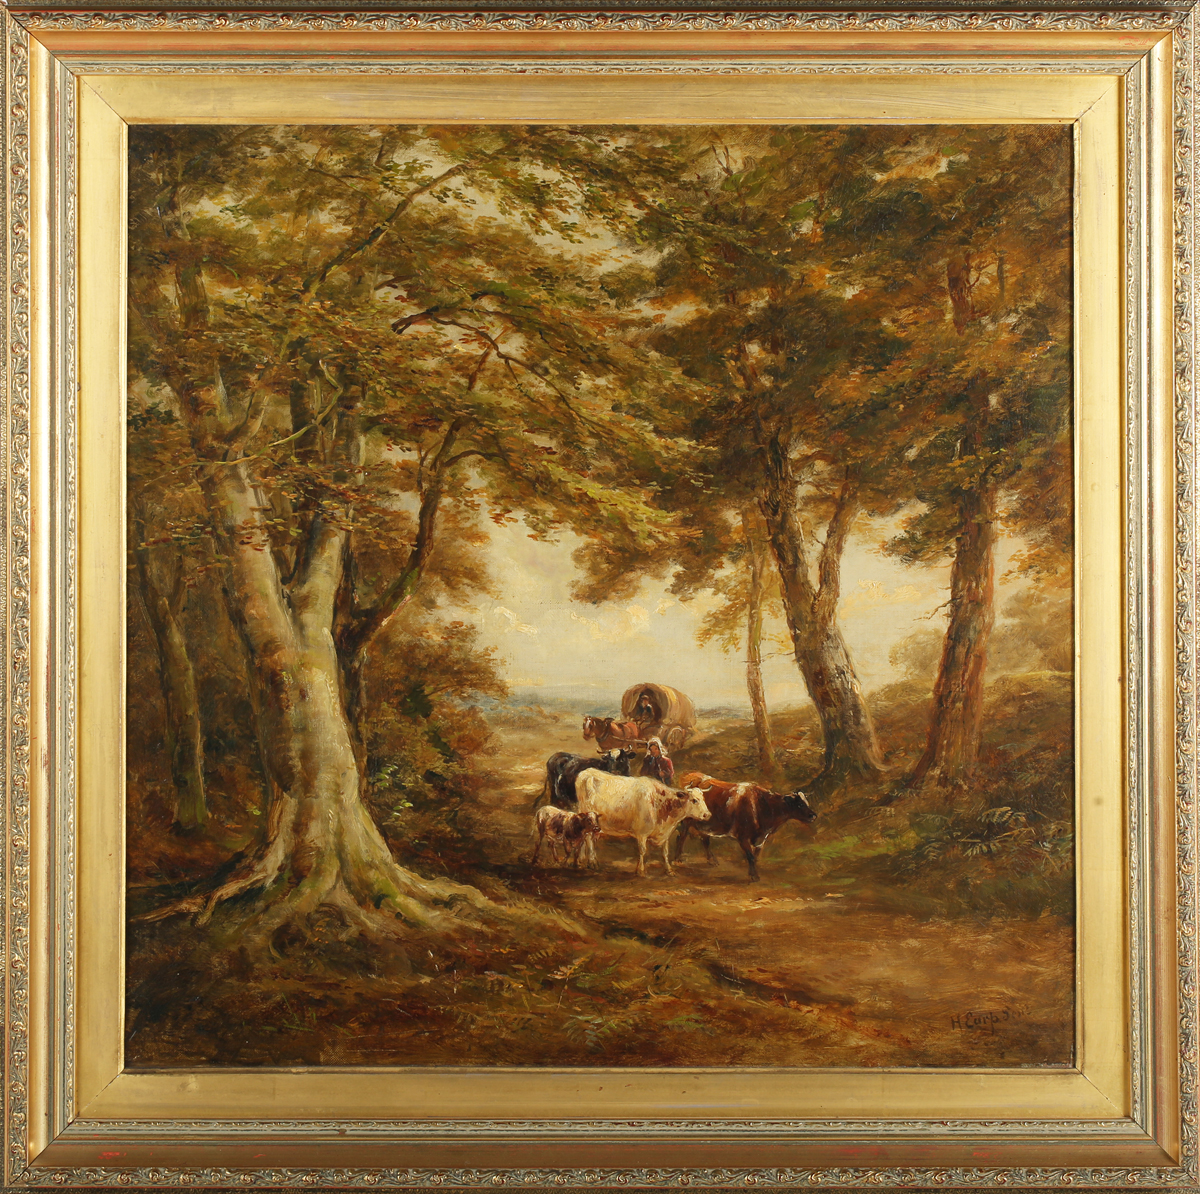 Henry Earp Senior - Cows, Figure and Horse-drawn Wagon on a Tree-lined Country Lane, 19th century - Image 5 of 5